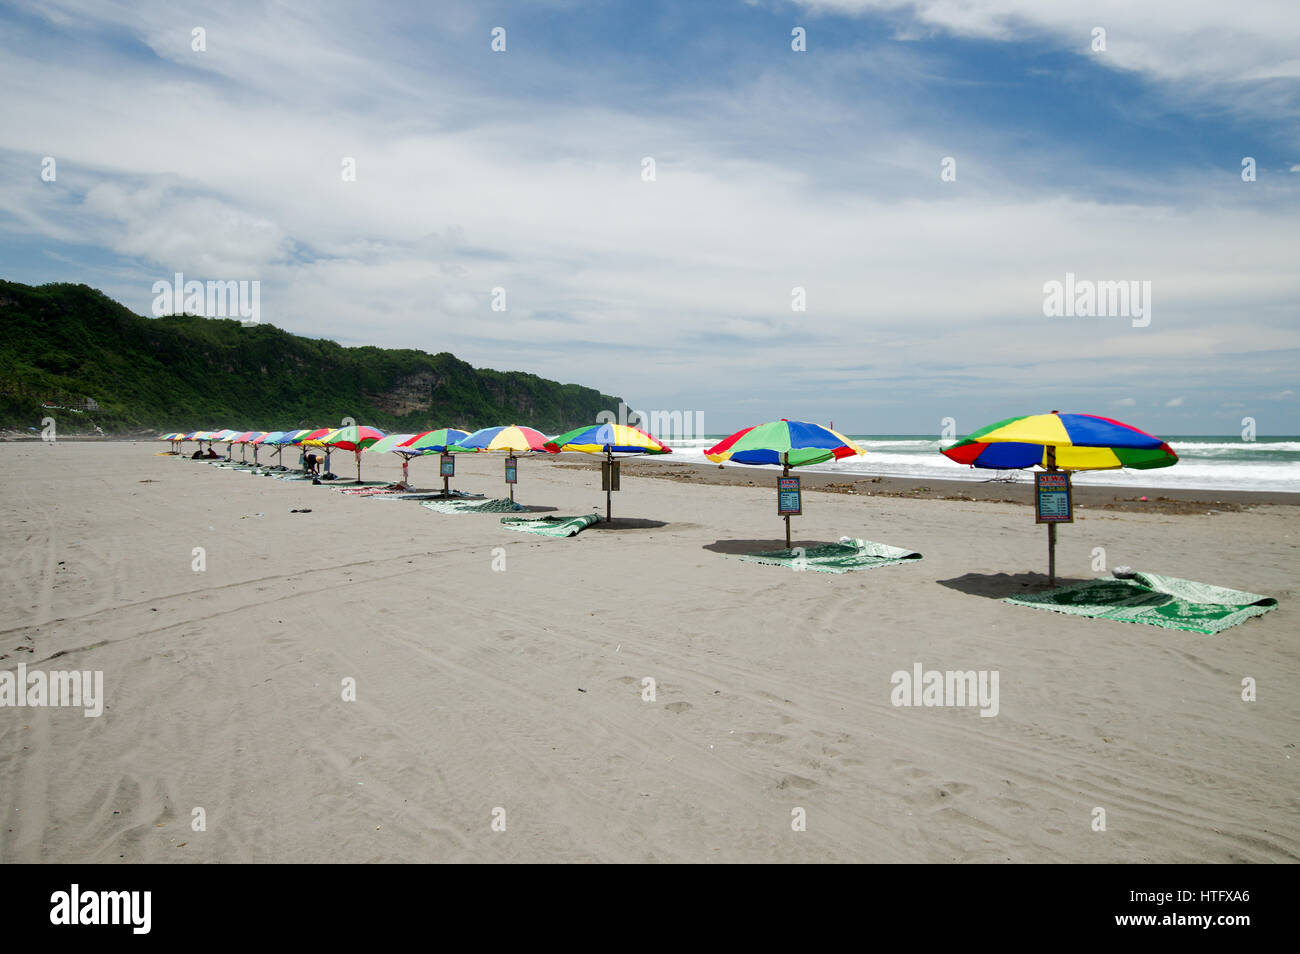 Row of colourful parasols along Parangtritis Beach in Central Java, Indonesia Stock Photo